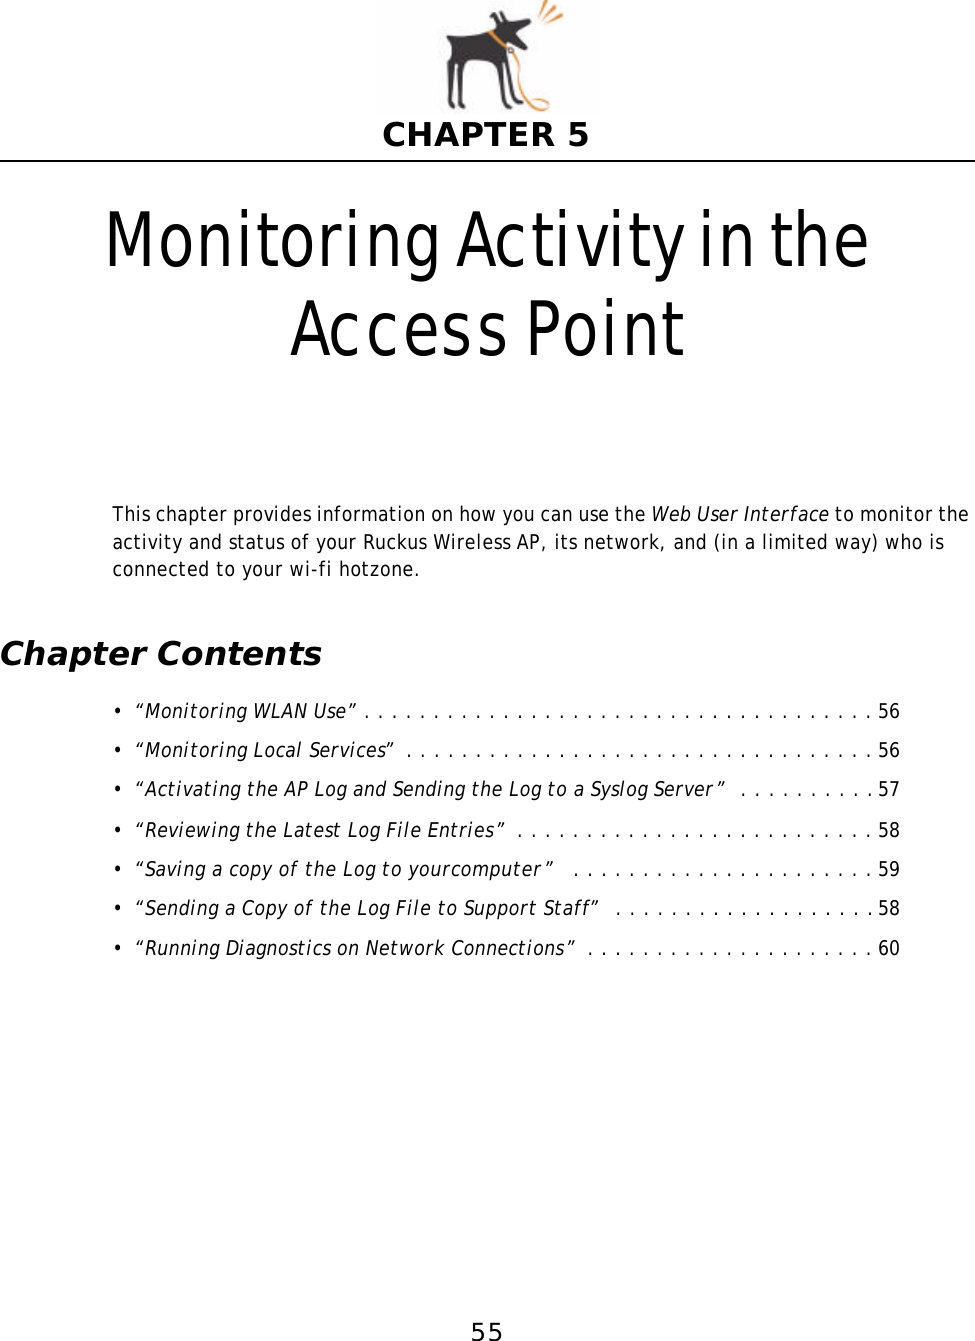 55CHAPTER 5Monitoring Activity in the Access PointThis chapter provides information on how you can use the Web User Interface to monitor the activity and status of your Ruckus Wireless AP, its network, and (in a limited way) who is connected to your wi-fi hotzone.Chapter Contents•“Monitoring WLAN Use” . . . . . . . . . . . . . . . . . . . . . . . . . . . . . . . . . . . . . 56•“Monitoring Local Services”  . . . . . . . . . . . . . . . . . . . . . . . . . . . . . . . . . . 56•“Activating the AP Log and Sending the Log to a Syslog Server”  . . . . . . . . . .57•“Reviewing the Latest Log File Entries”  . . . . . . . . . . . . . . . . . . . . . . . . . . 58•“Saving a copy of the Log to yourcomputer”   . . . . . . . . . . . . . . . . . . . . . . 59•“Sending a Copy of the Log File to Support Staff”  . . . . . . . . . . . . . . . . . . .58•“Running Diagnostics on NetworkConnections”  . . . . . . . . . . . . . . . . . . . . . 60